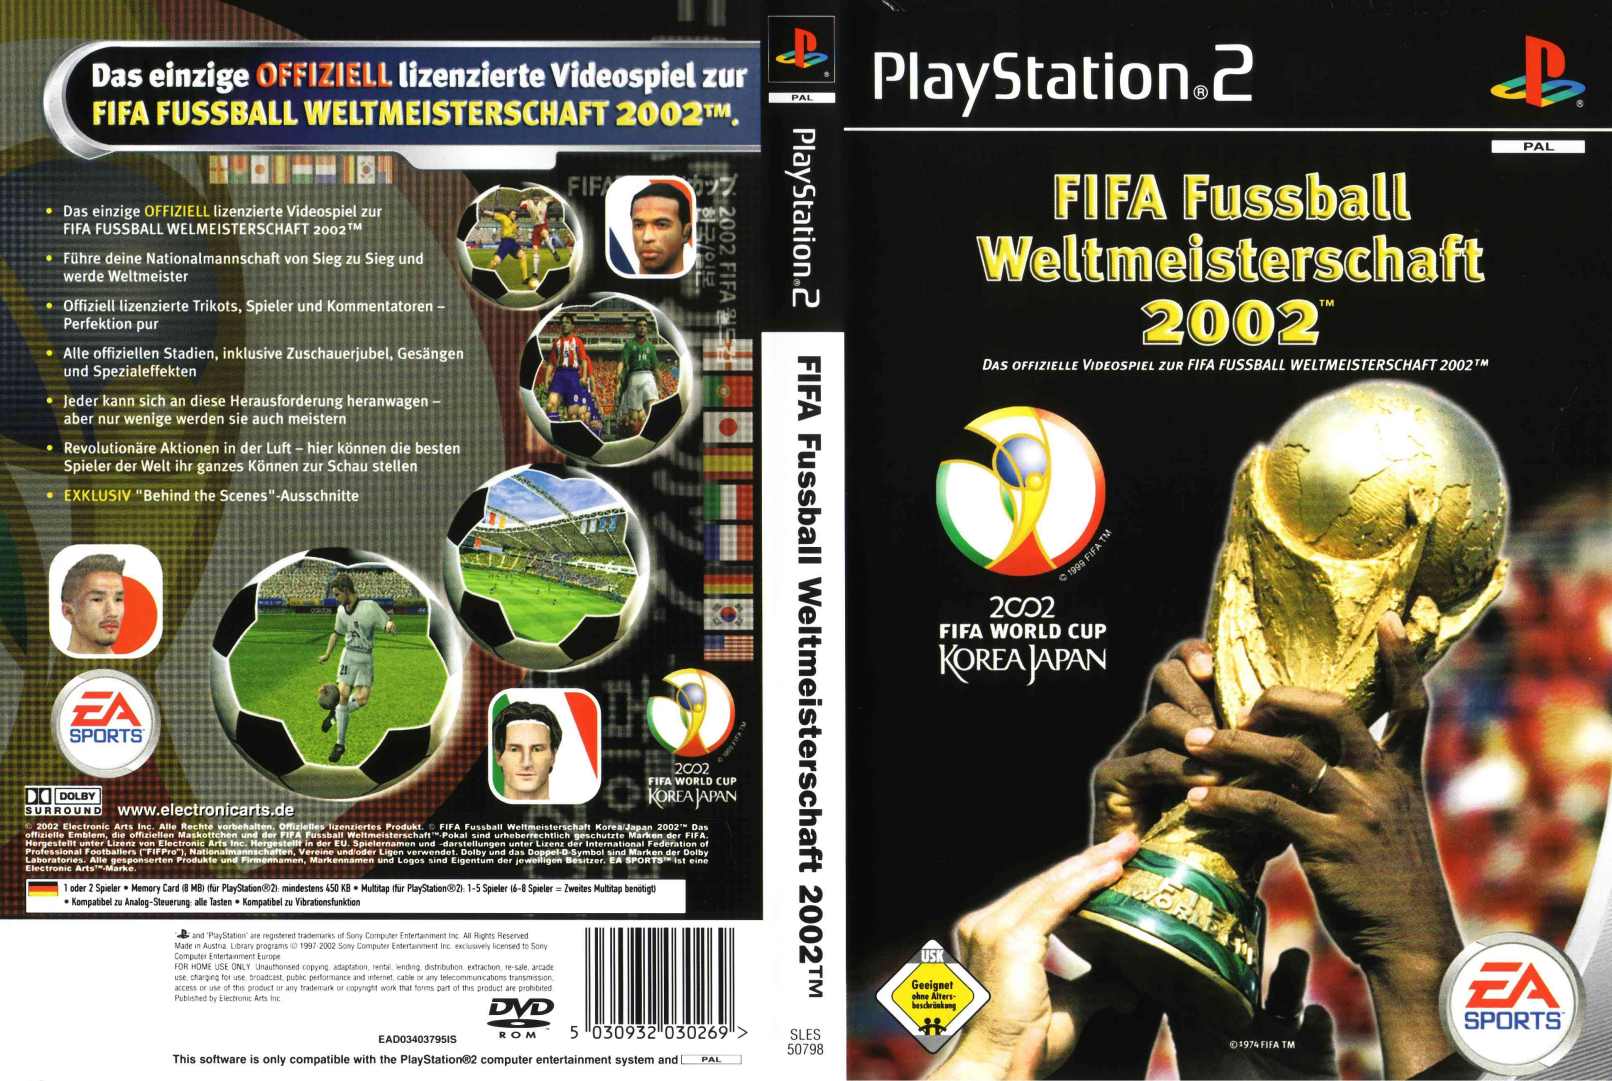 Fifa Fussball Weltmeisterschaft 02 Pal Ps2 Full Playstation 2 Covers Cover Century Over 500 000 Album Art Covers For Free